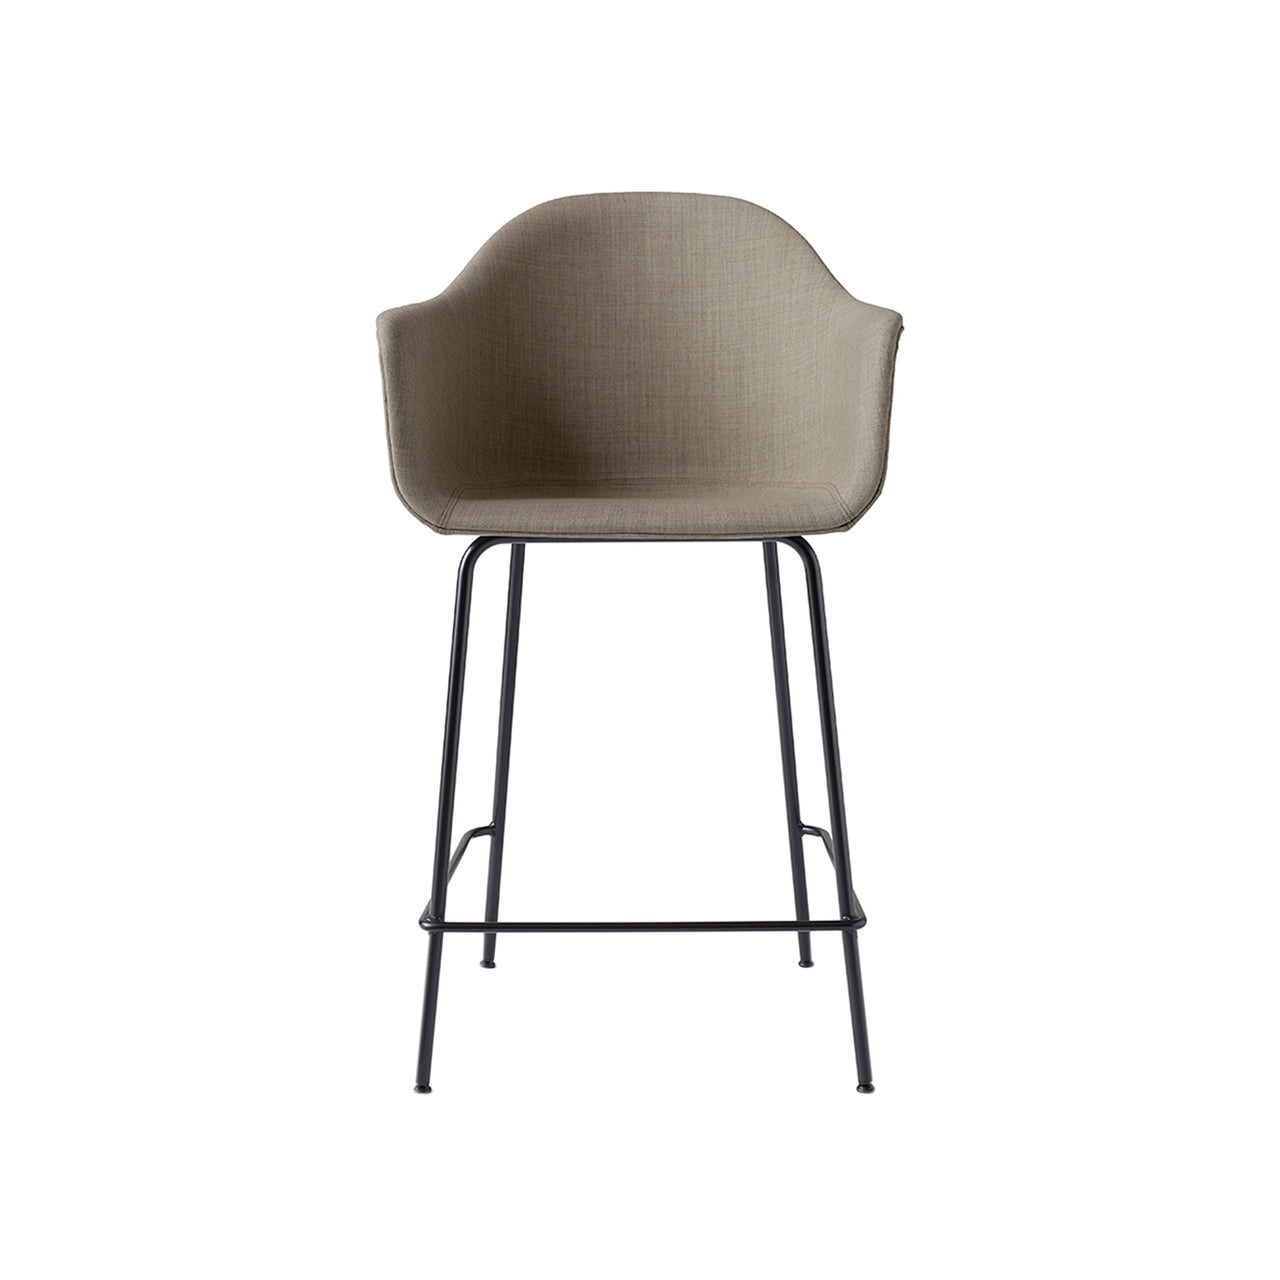 Harbour Bar + Counter Chair: Steel Base Upholstered + Counter + Remix3 233